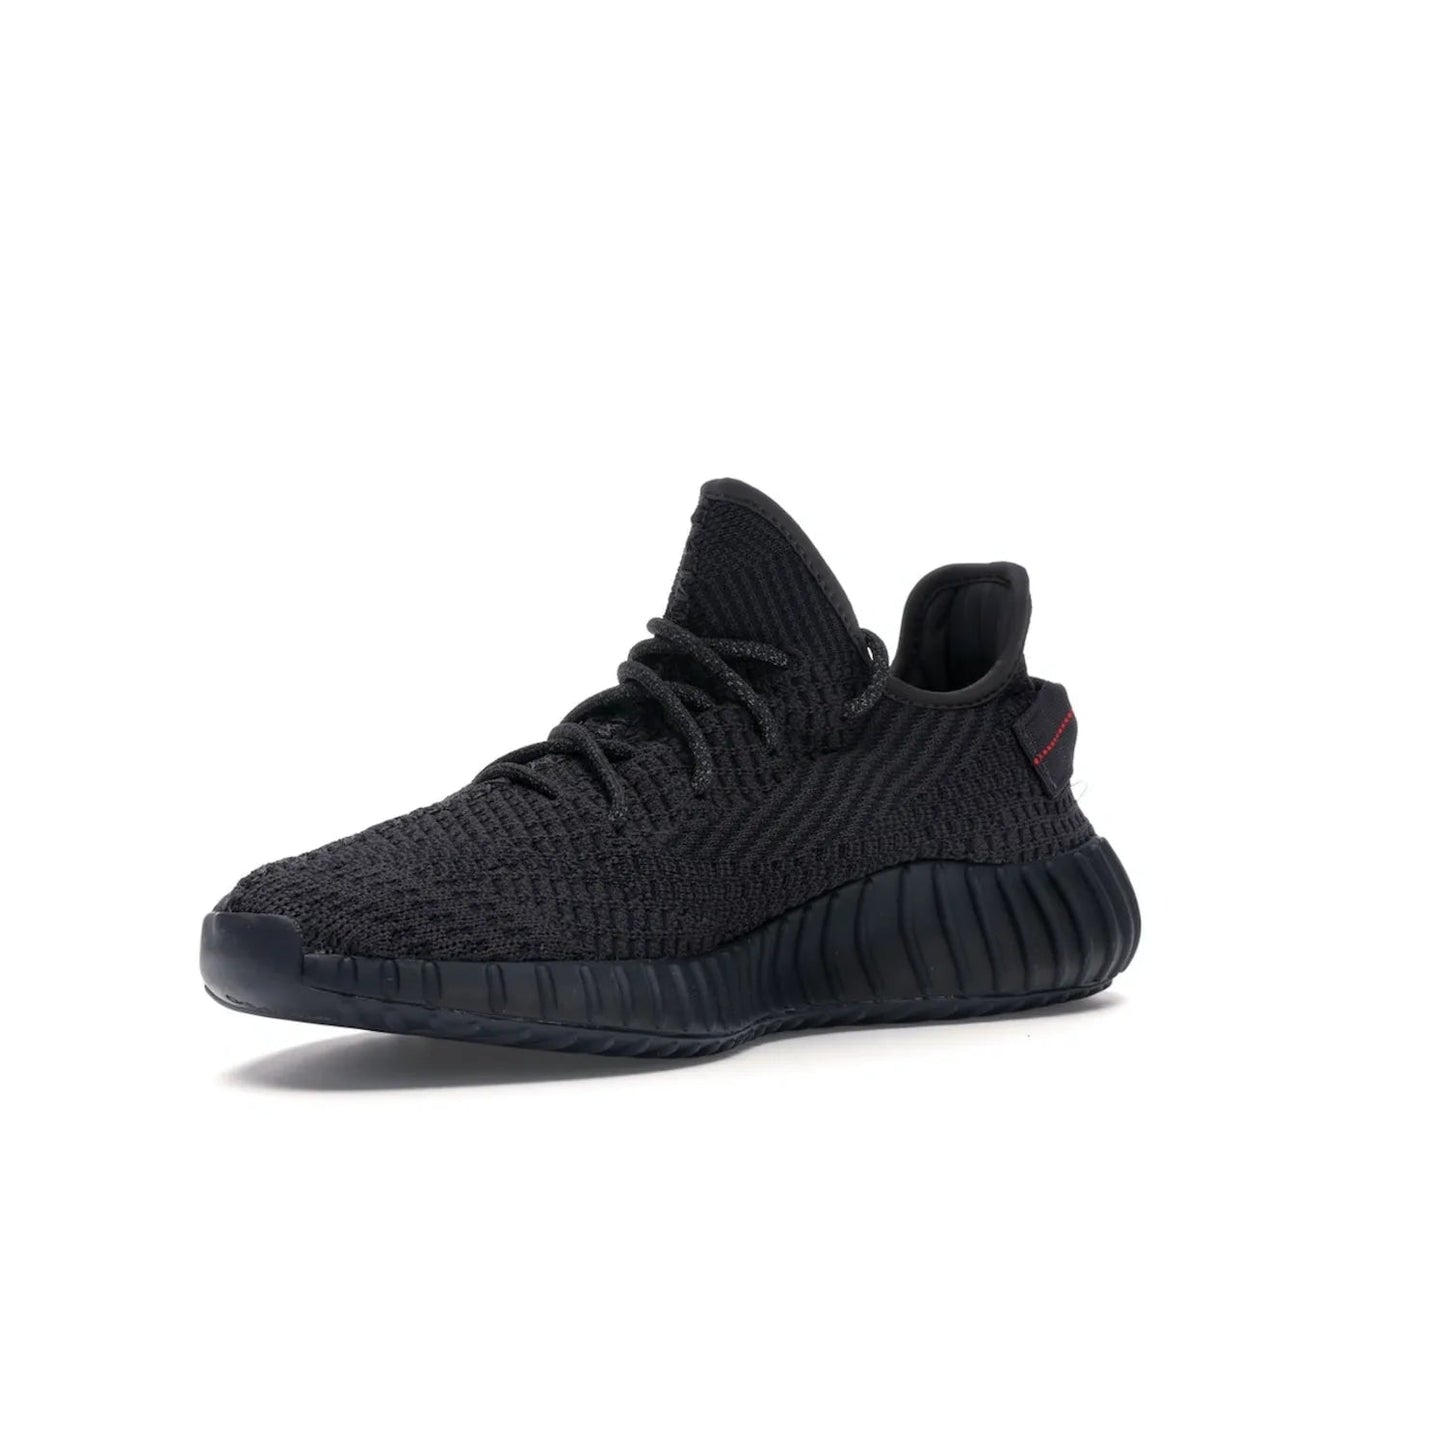 adidas Yeezy Boost 350 V2 Black (Non-Reflective) - Image 15 - Only at www.BallersClubKickz.com - A timeless, sleek silhouette crafted from quality materials. The adidas Yeezy Boost 350 V2 Black (Non-Reflective) brings style and sophistication. Get yours now!